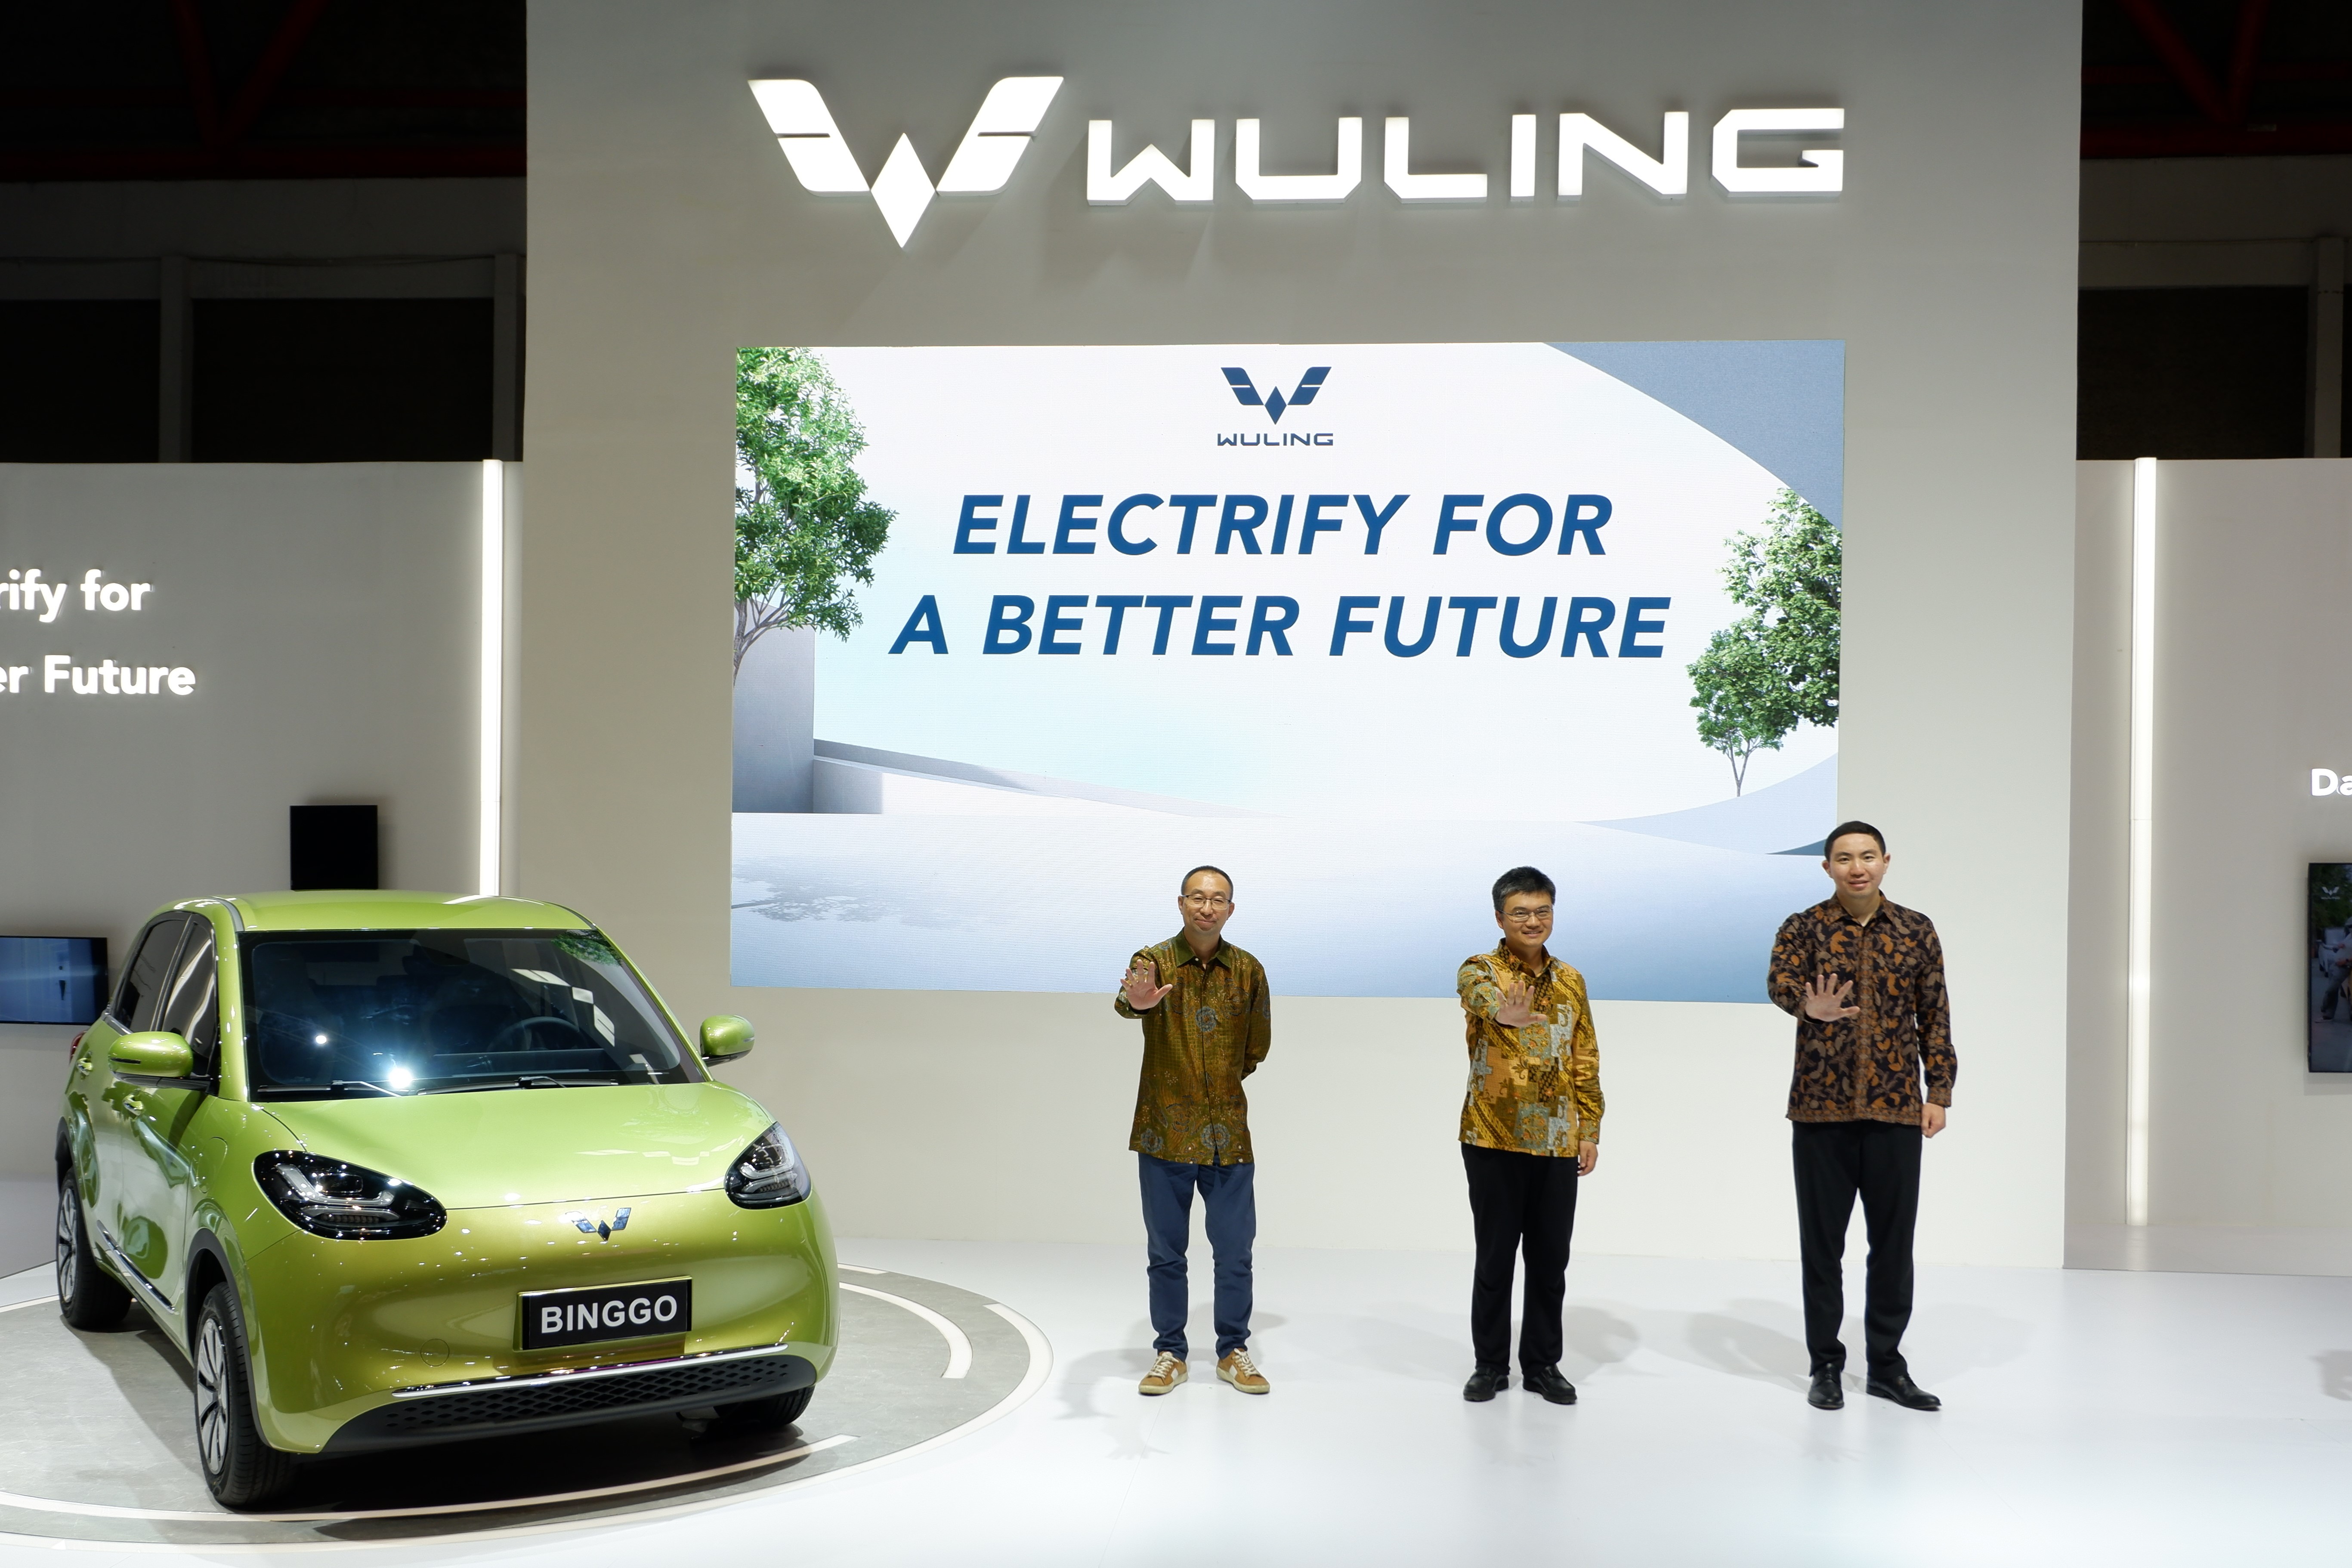 Image Wuling Brings Complete Electric Vehicle Innovation at the Periklindo Electric Vehicle Show